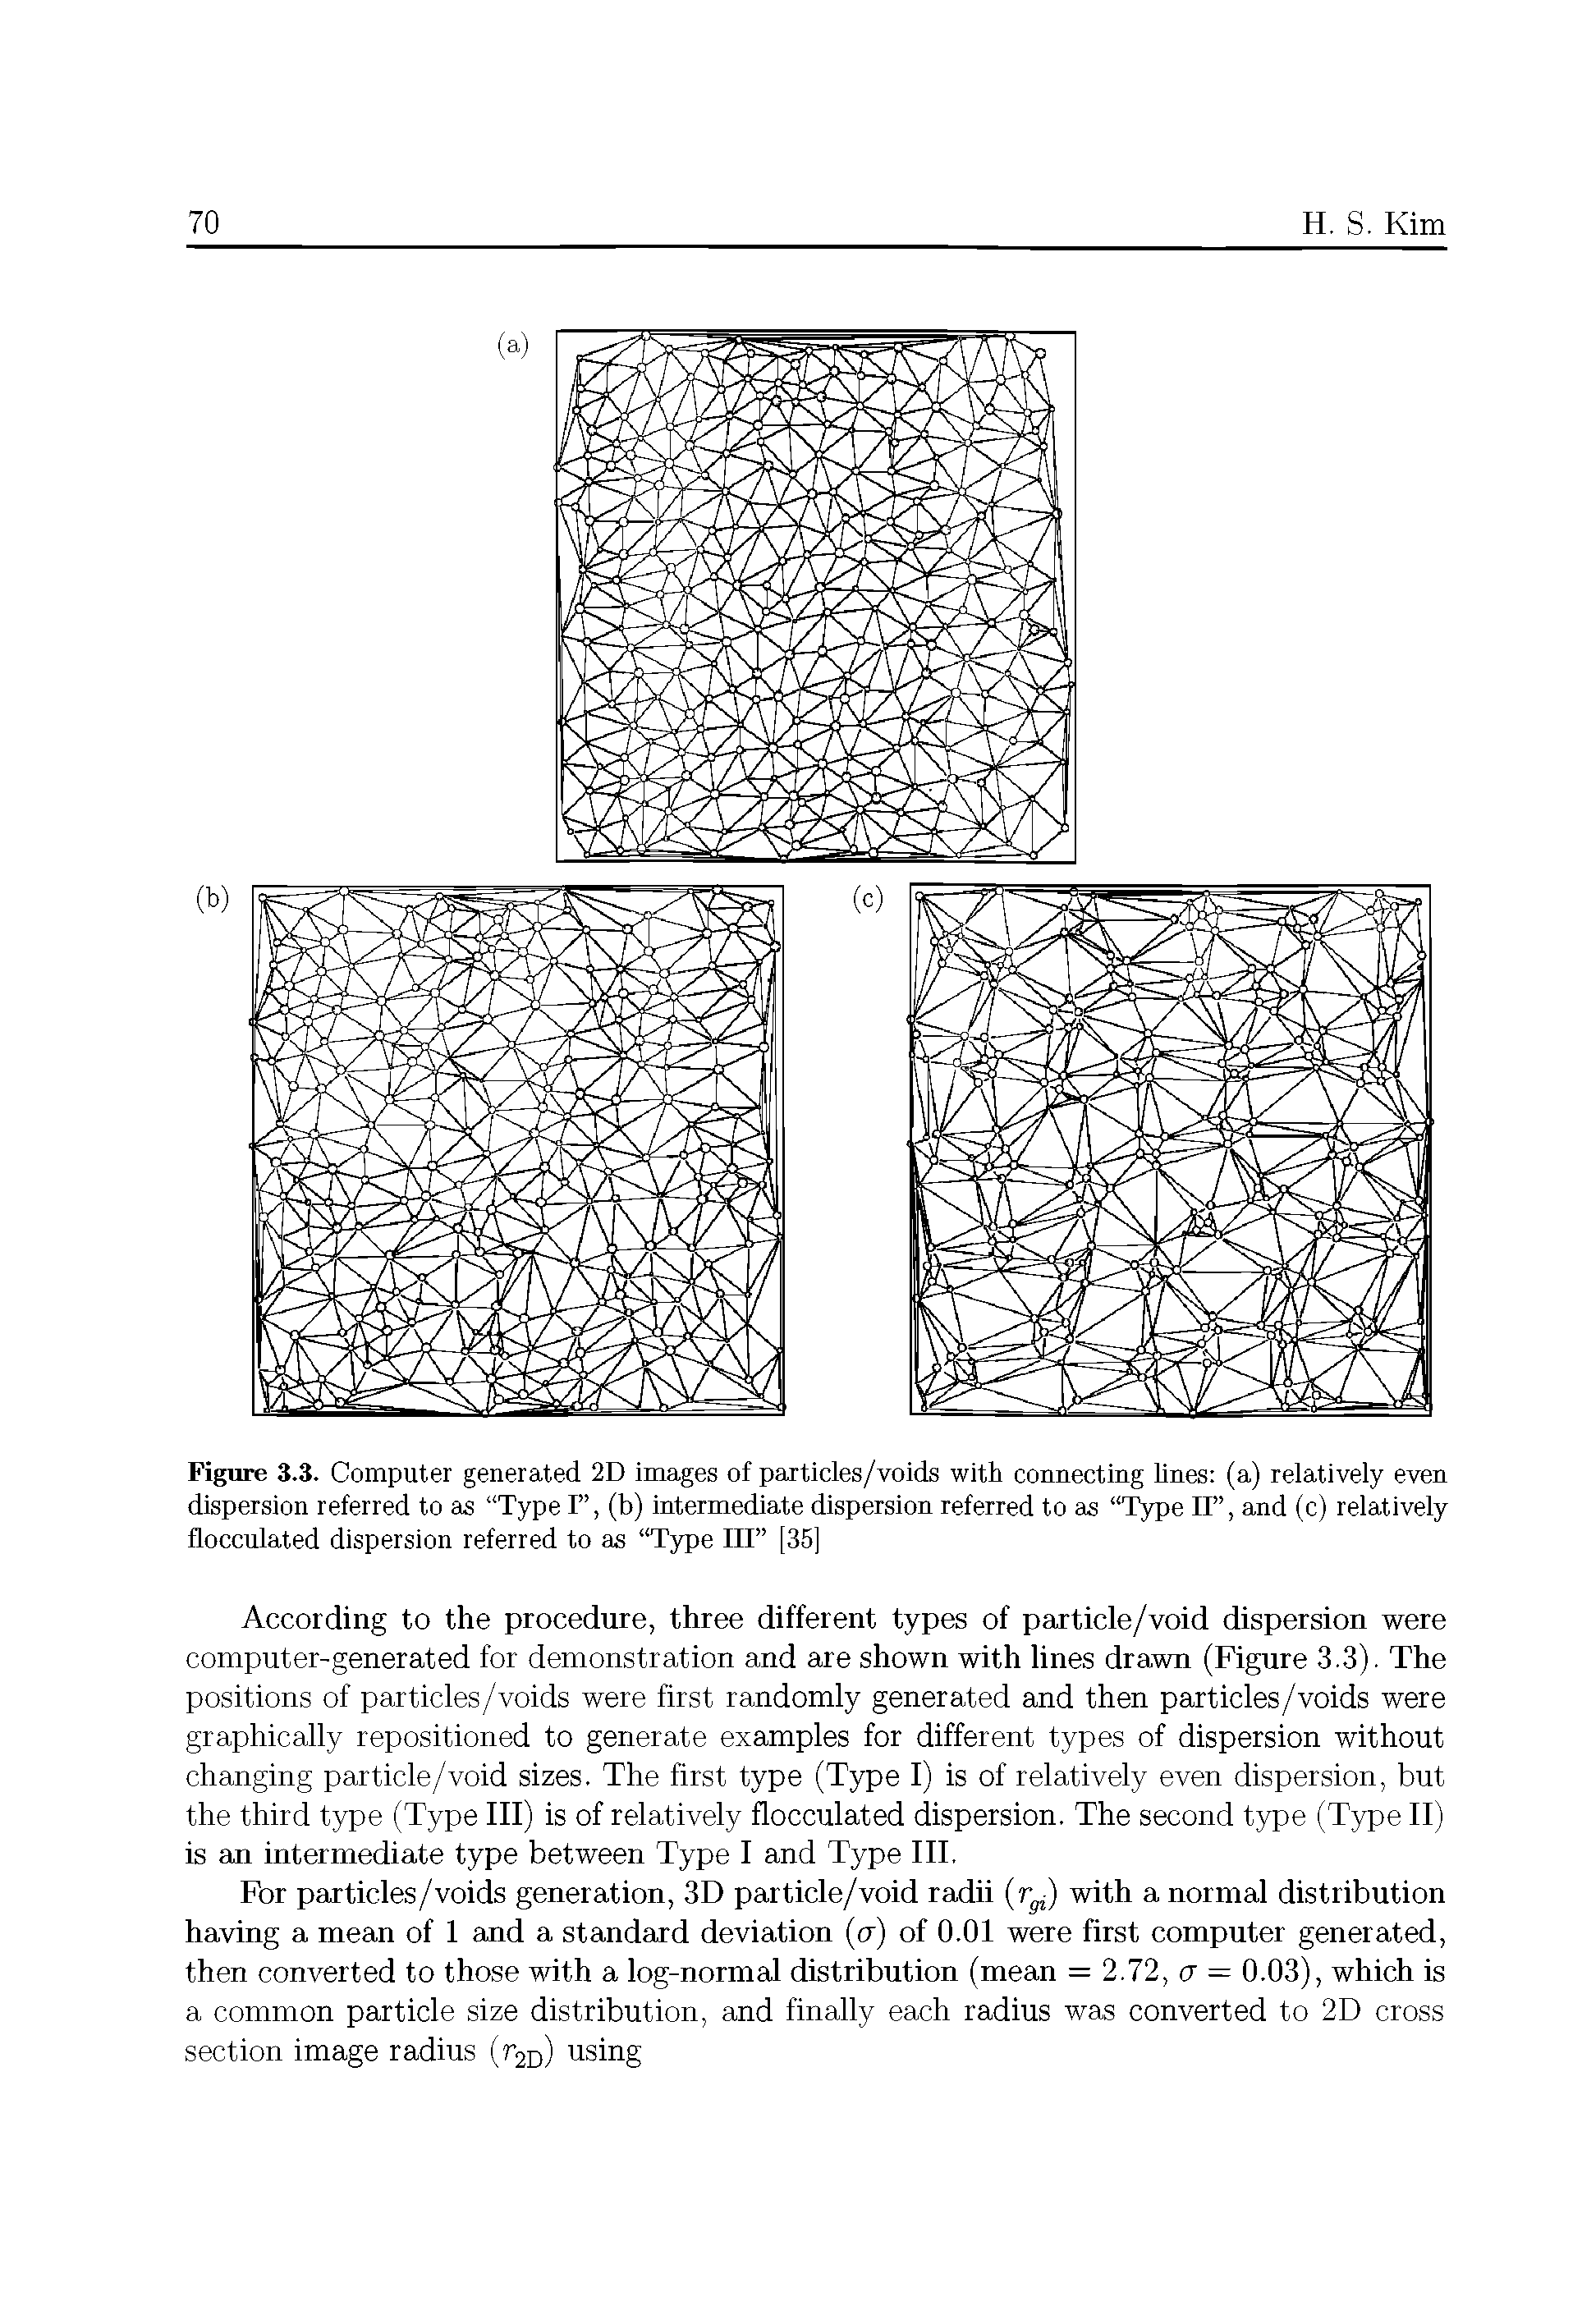 Figure 3.3. Computer generated 2D images of particles/voids with connecting lines (a) relatively even dispersion referred to as Type F, (b) intermediate dispersion referred to as Type n , and (c) relatively flocculated dispersion referred to as Type ni [35]...